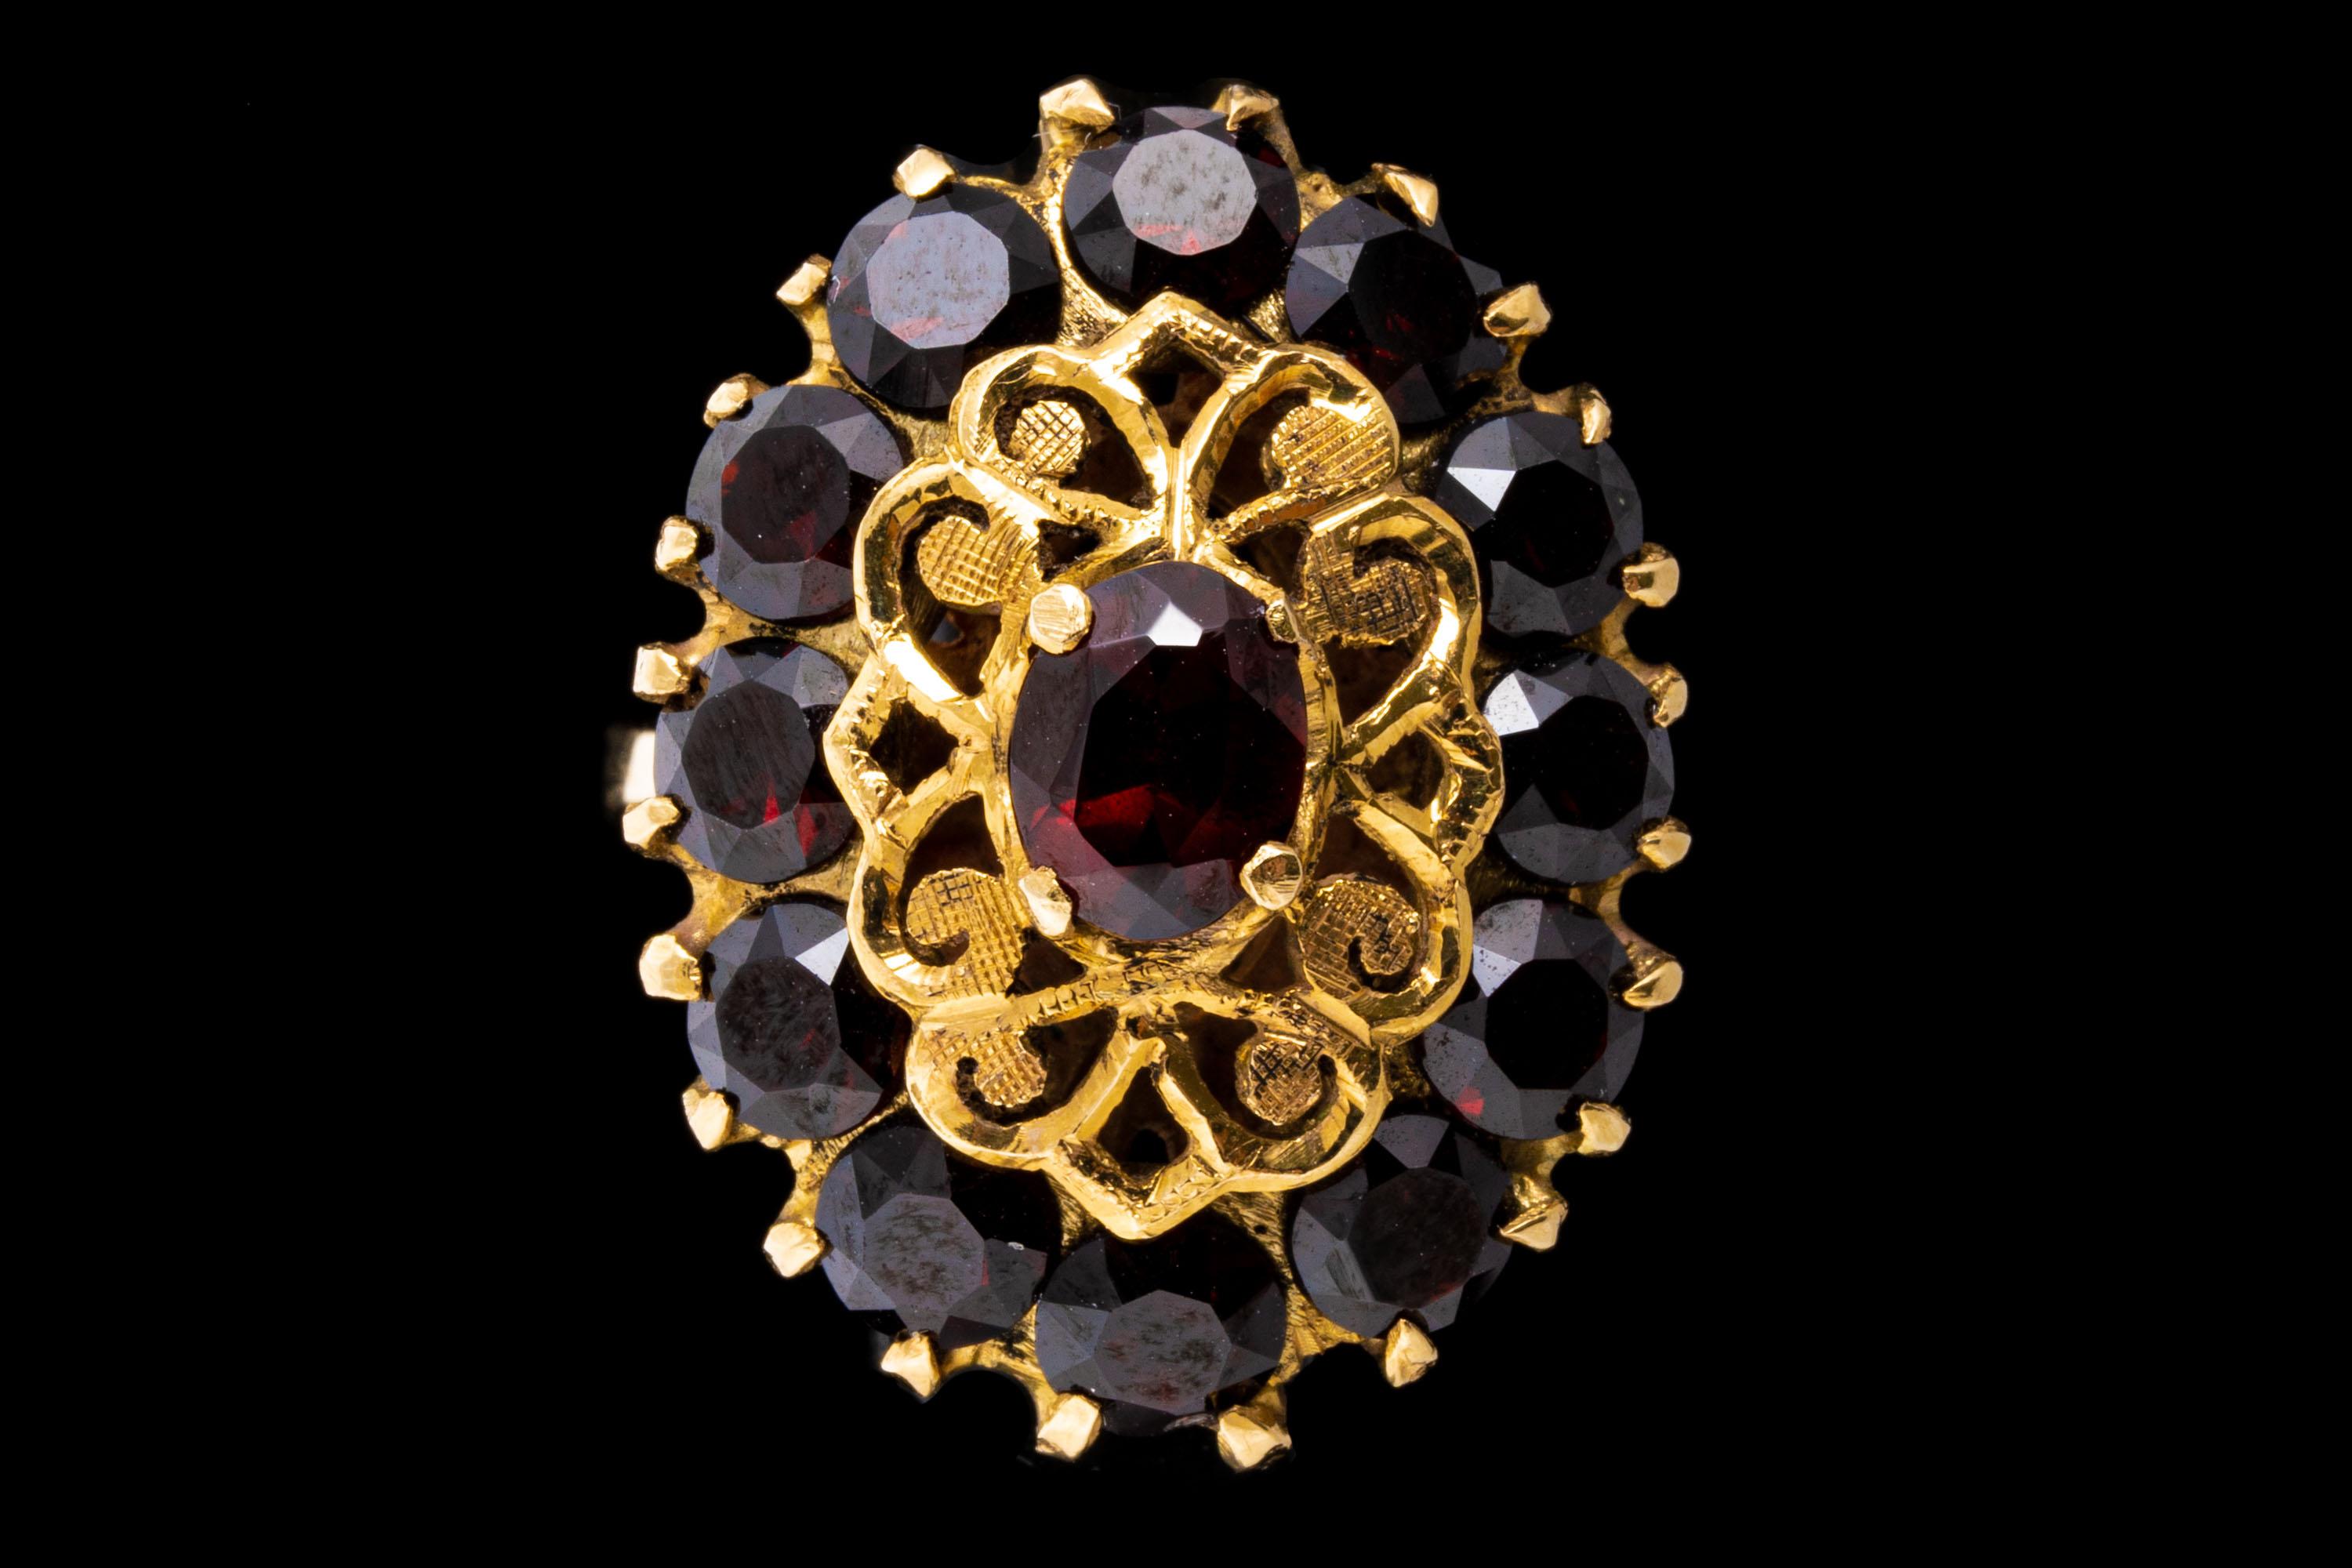 18k yellow gold ring. This vintage retro ring is an elongated oval motif cocktail style, decorated with an oval faceted, dark burgundy color center, approximately 0.49 CTS, surrounded by a pierced filigree borderand framed by a halo of round